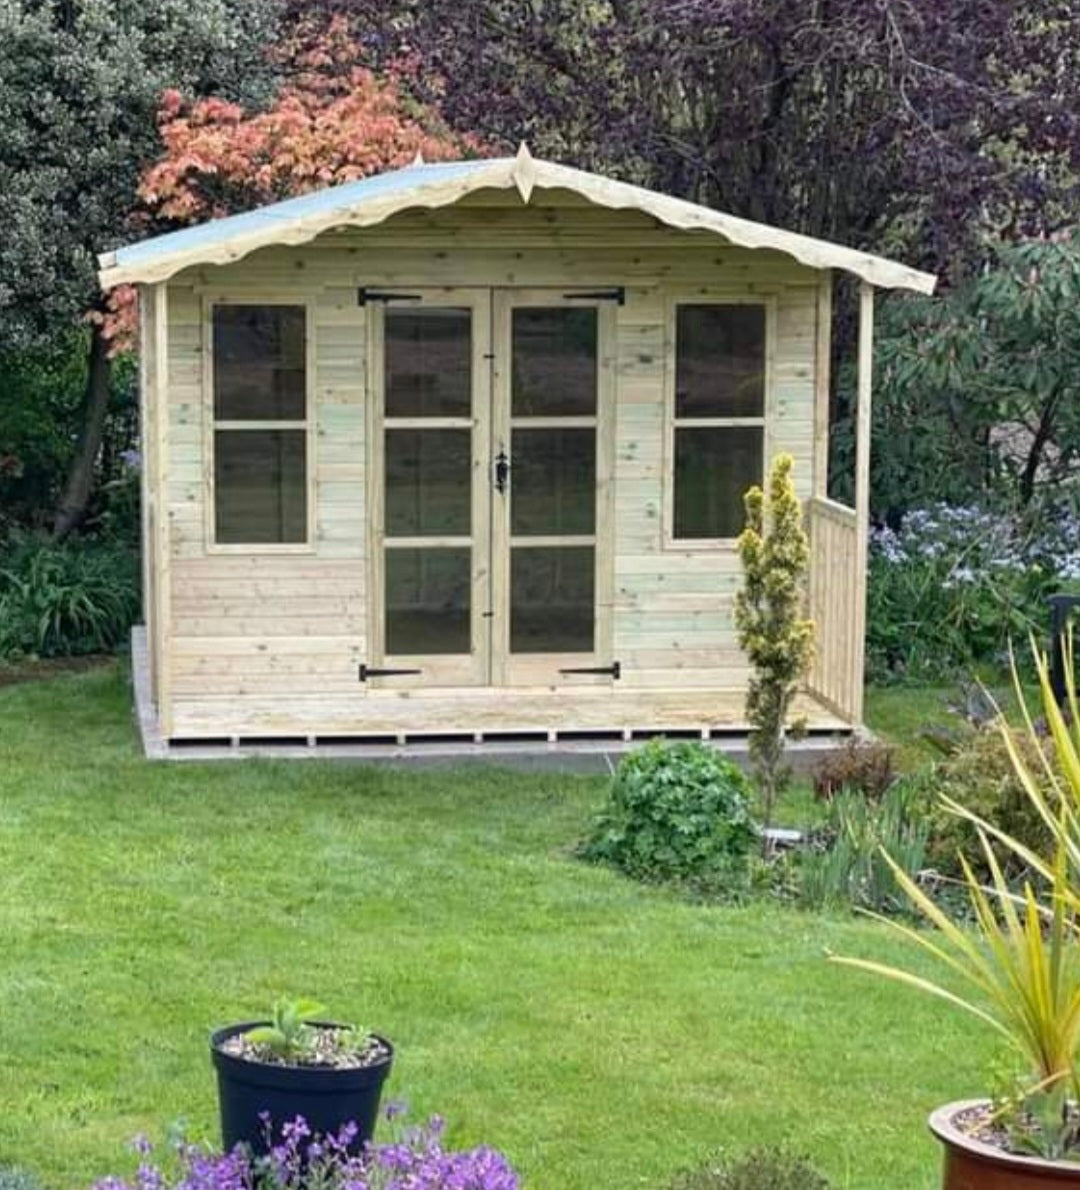 Tanalised Traditional Summerhouse Keighley Timber & Fencing sheds www.keighleytimbersheds.co.uk